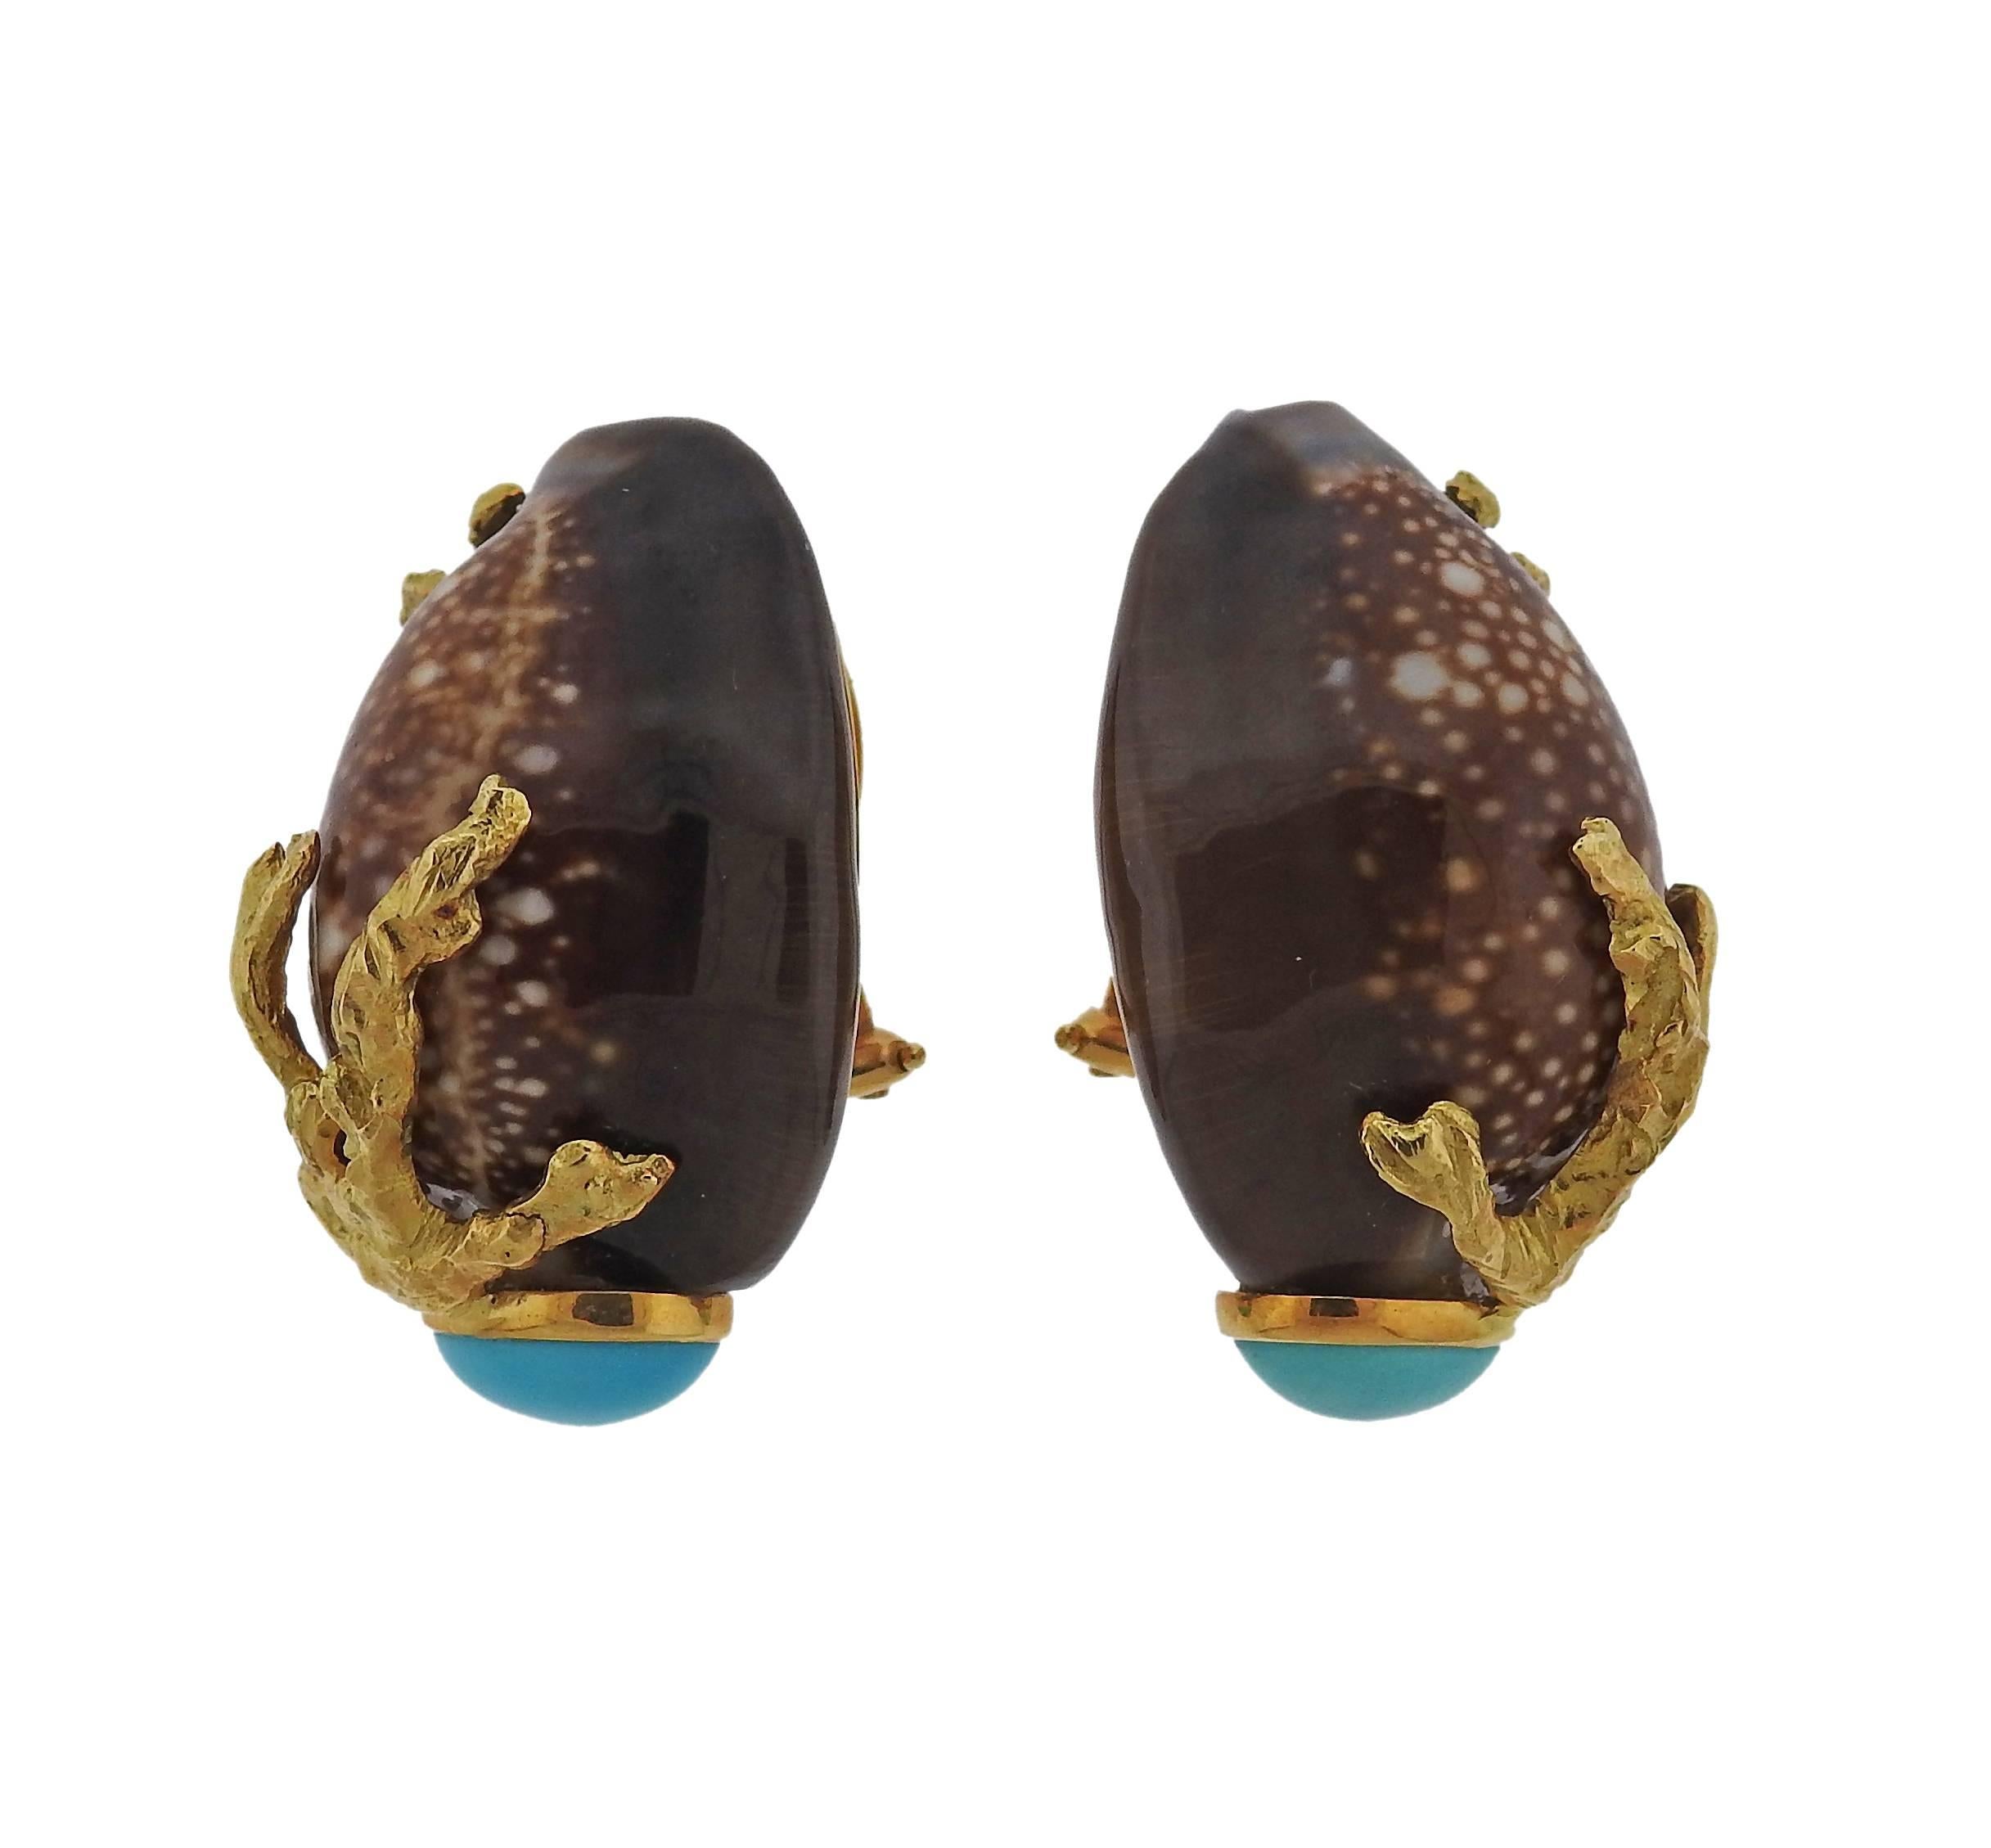 Pair of 18k yellow gold earrings, crafted by Trianon, set with shell and turquoise. Earrings are 31mm x 23mm, weight - 27.6 grams. Marked: 750, Trianon, Maker's hallmark. 